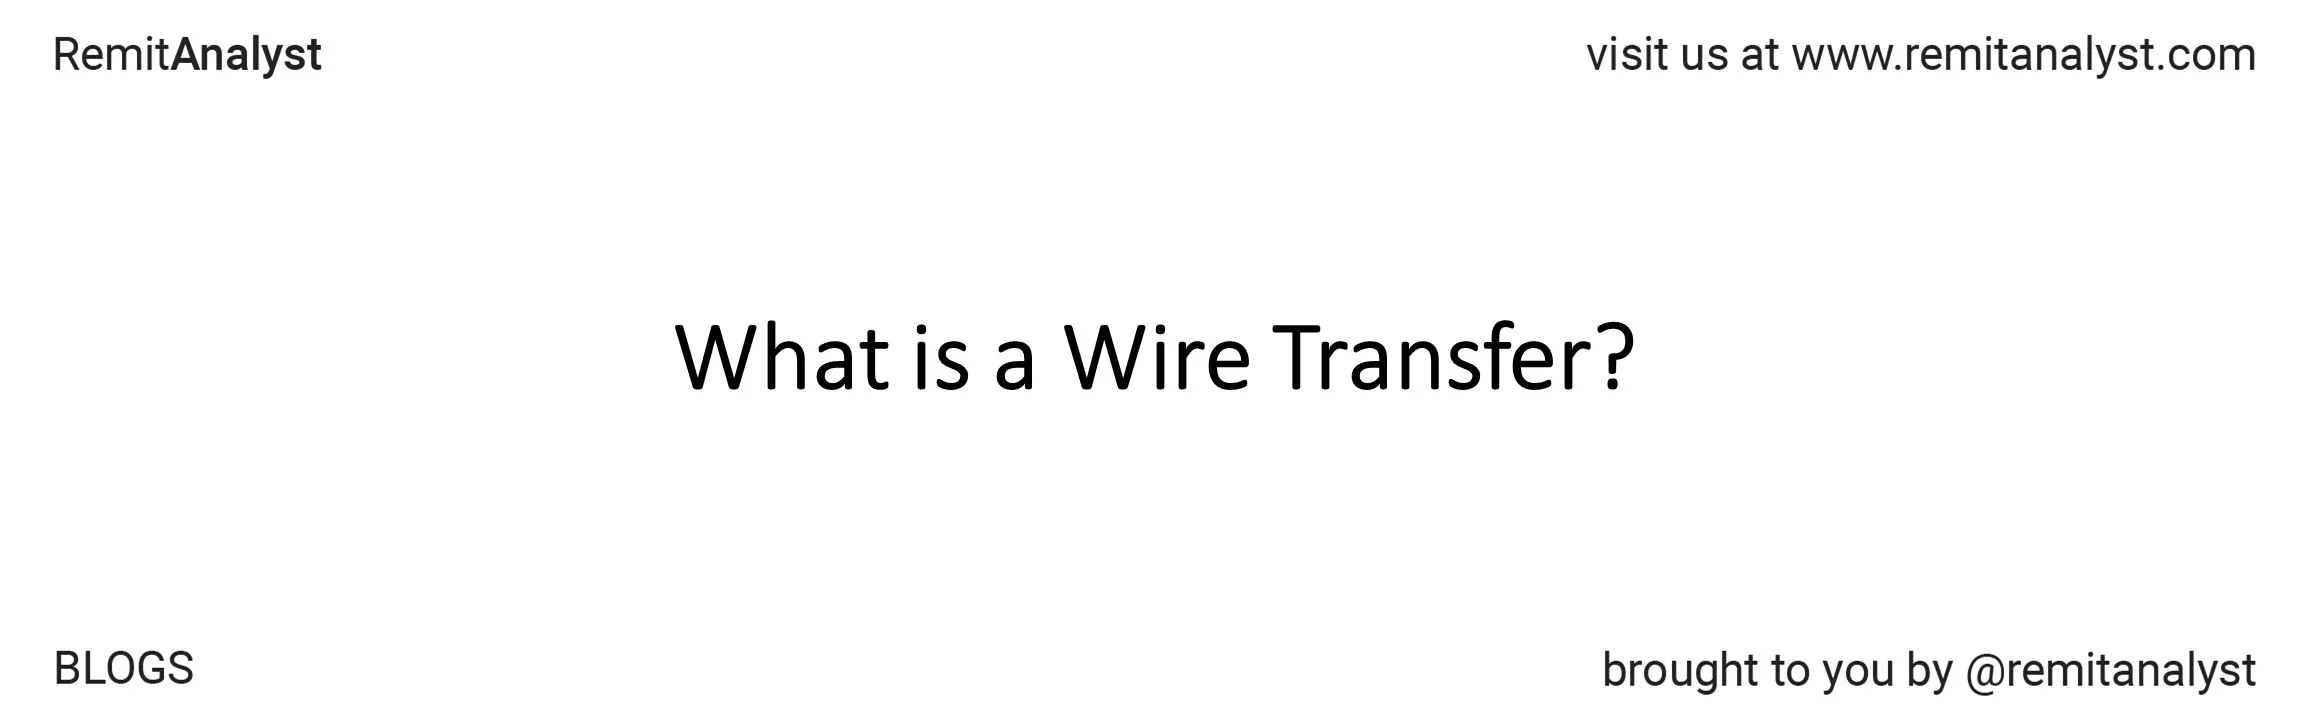 what-is-wire-transfer-title